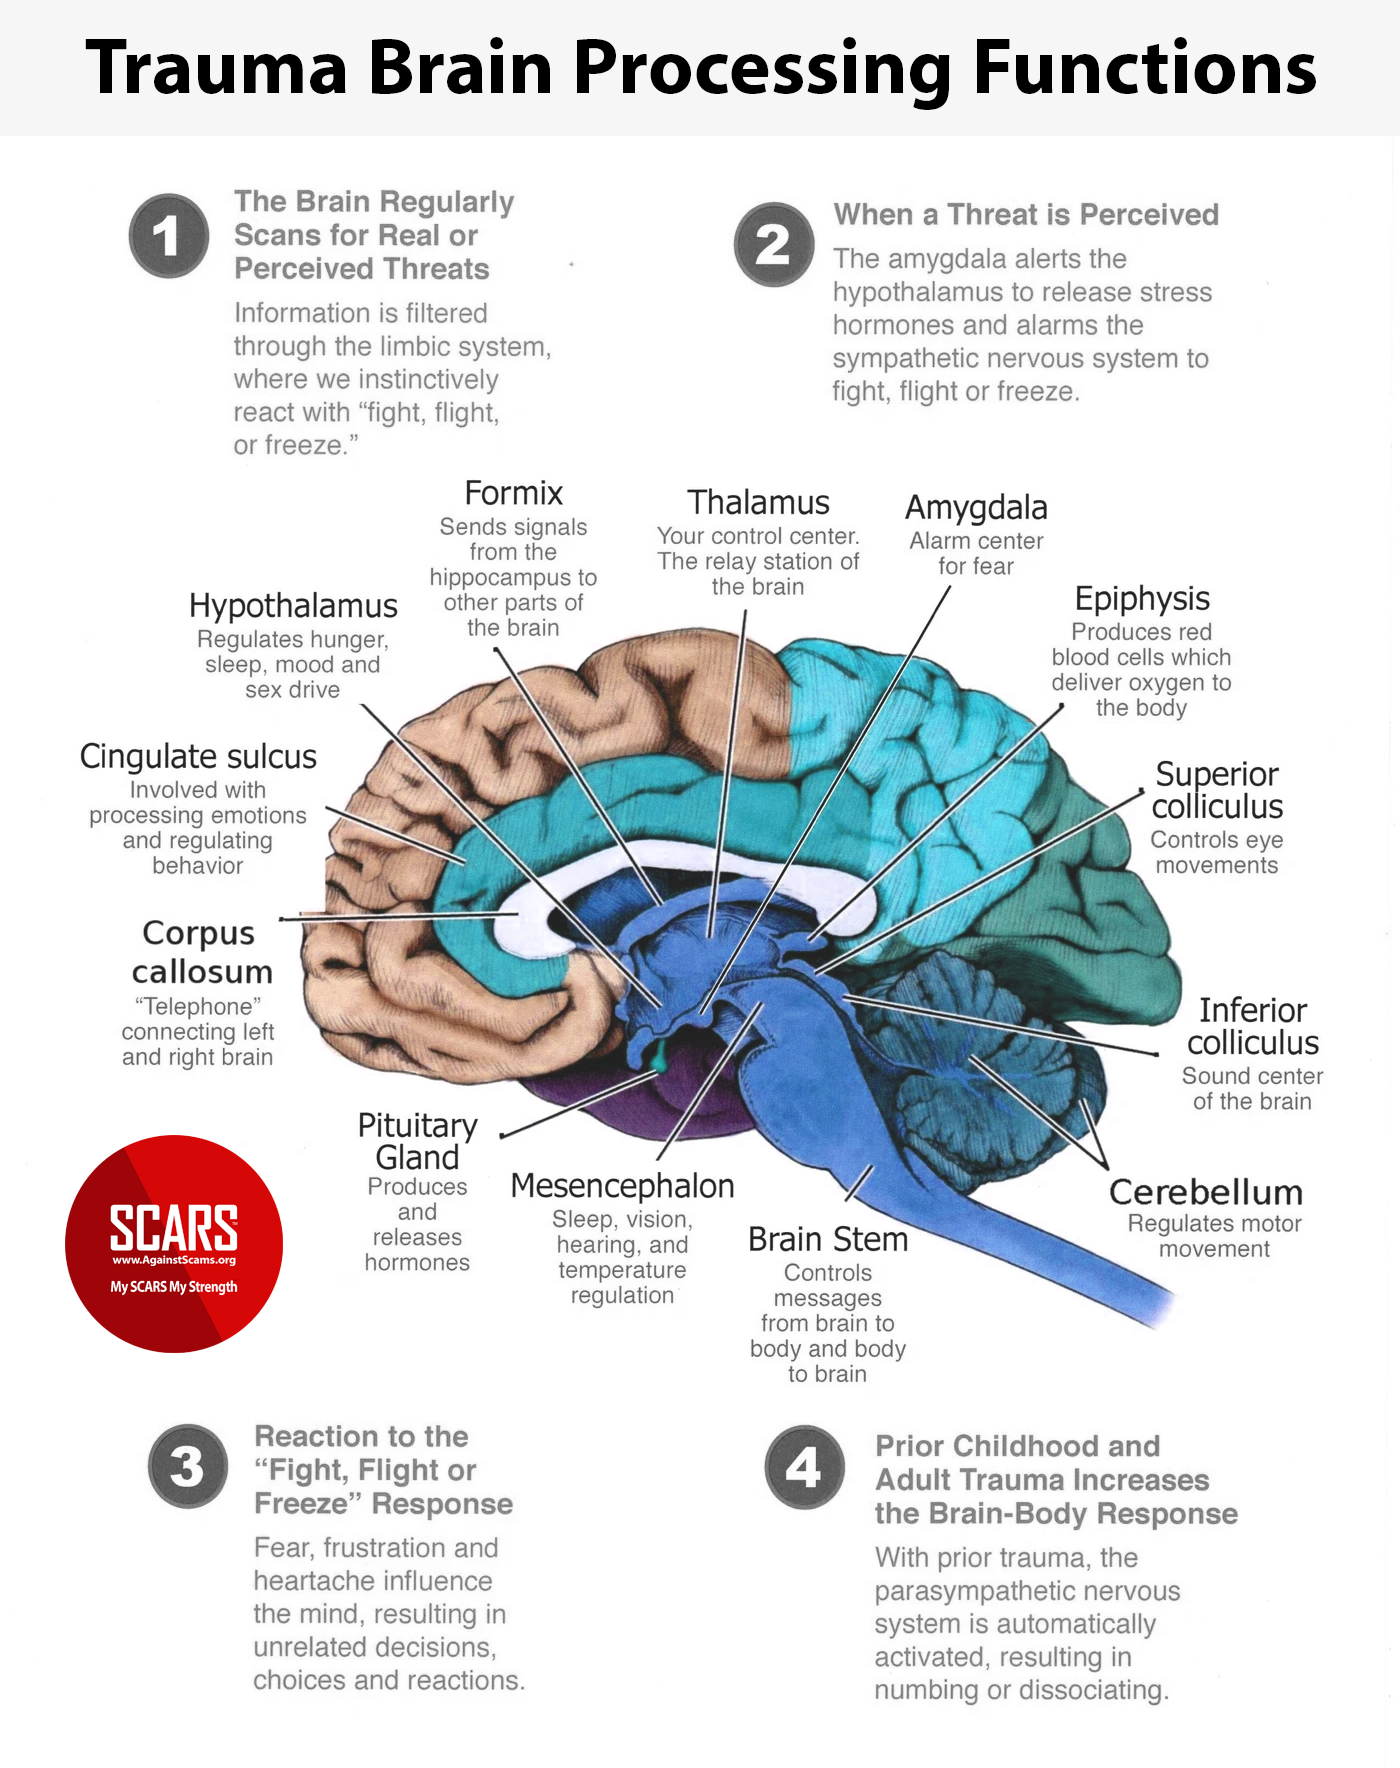 Trauma - Brain Processing Functions - Infographic 65